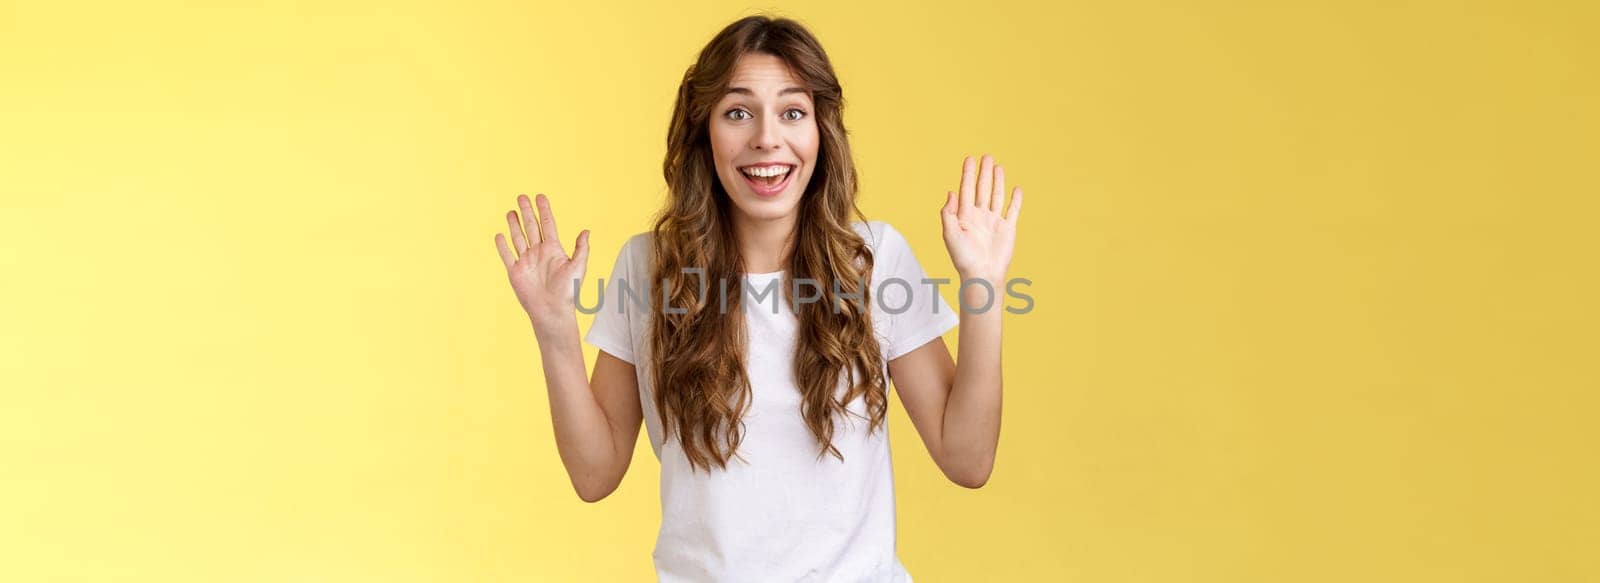 Cheerful glad outgoing cute positive young girl smiling broadly raise both palms waving hands hello greeting gesture welcome friend guest smiling hi gladly invite come inside yellow background. Lifestyle.